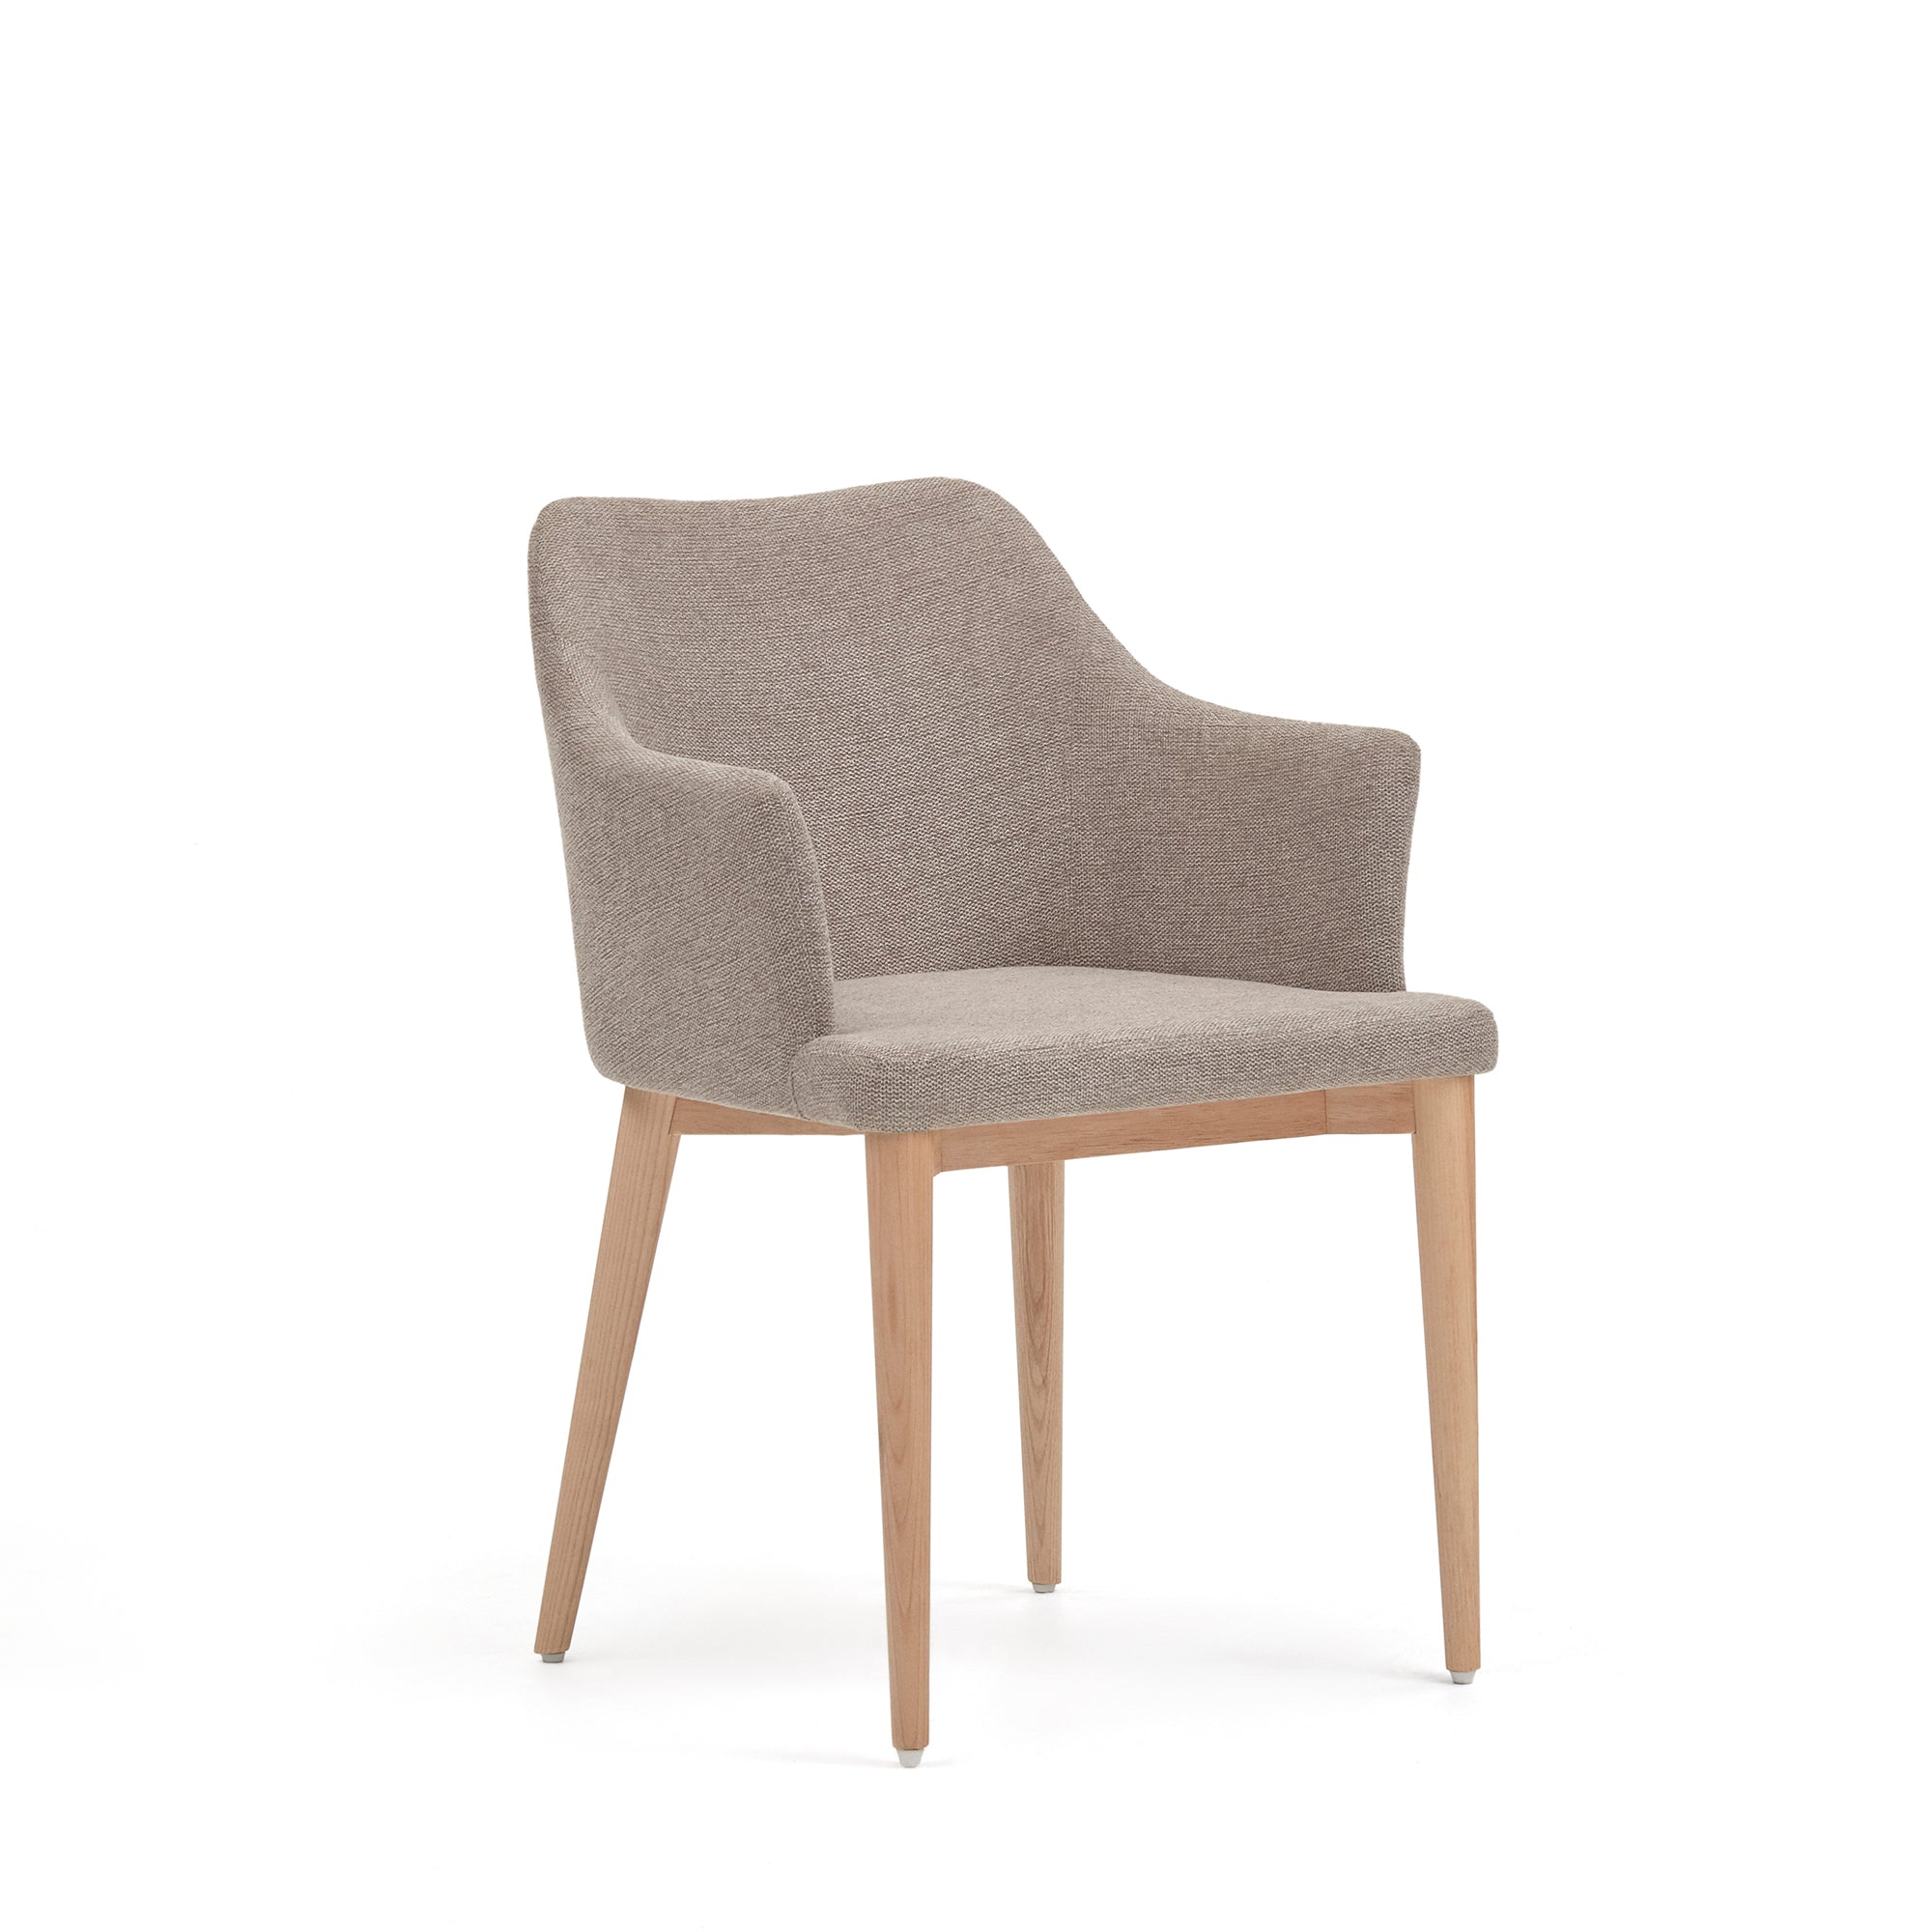 Croft chair in brown chenille with solid ash wood legs